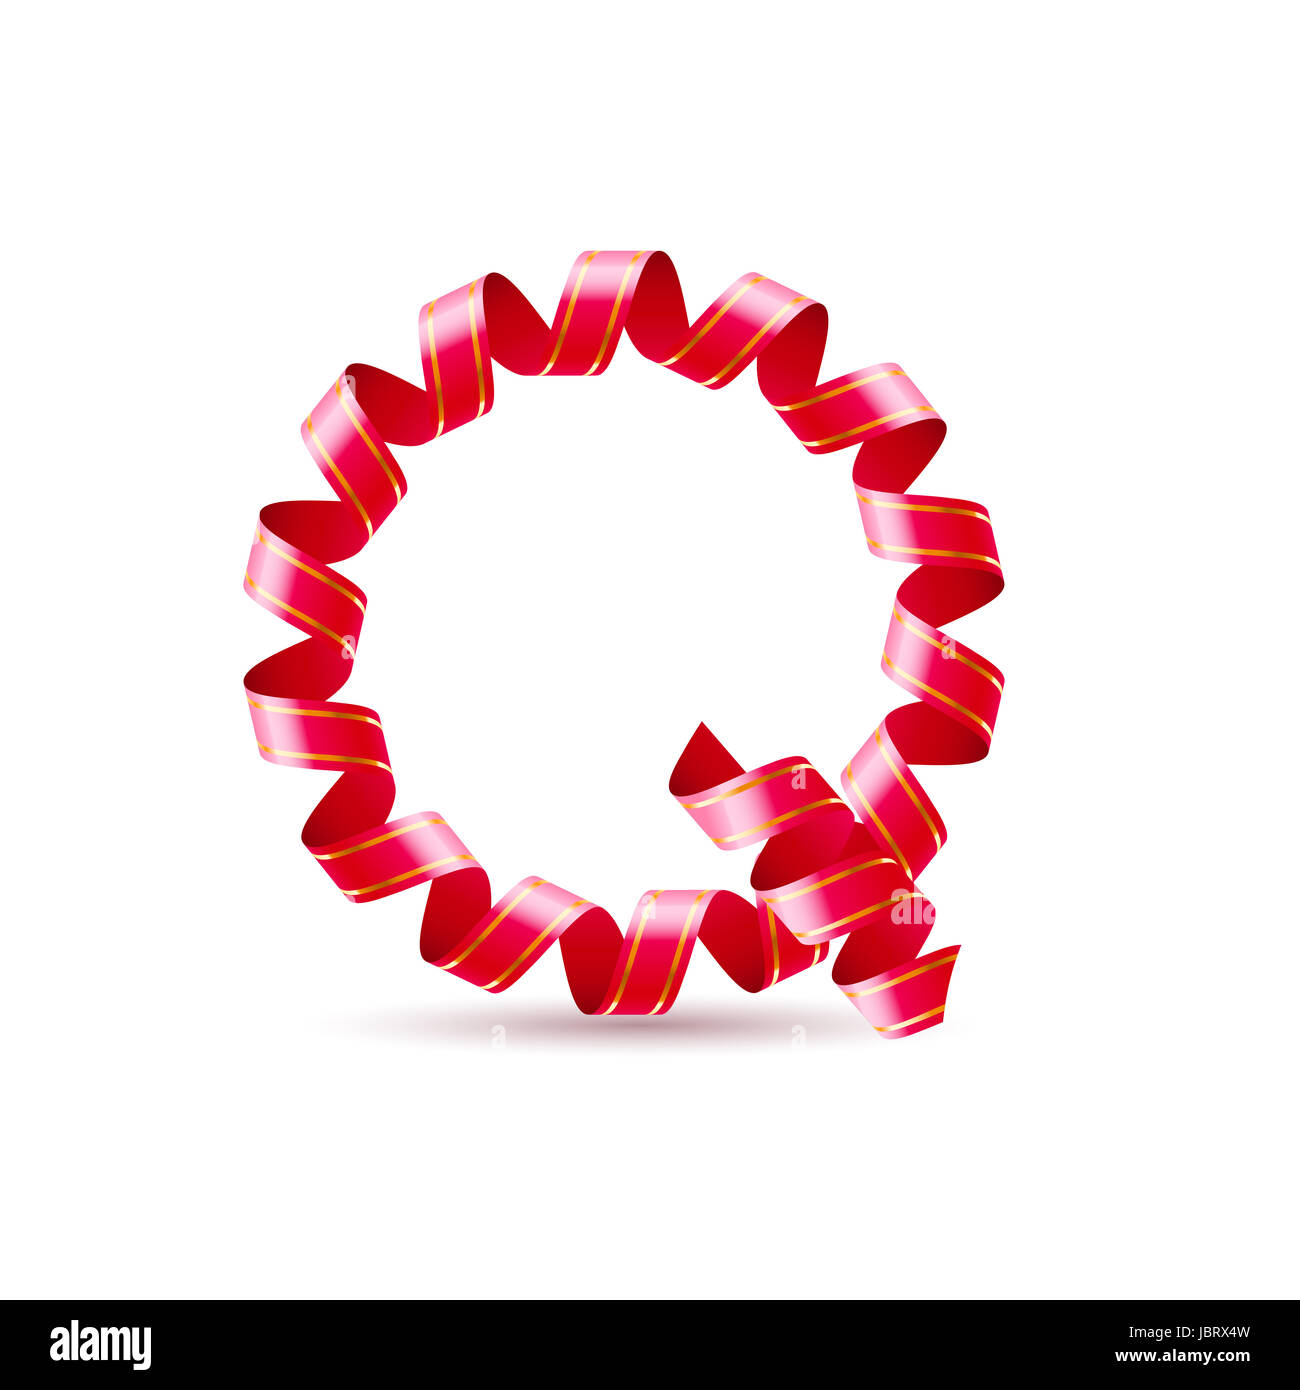 Letter Q made of red curled shiny ribbon Stock Photo